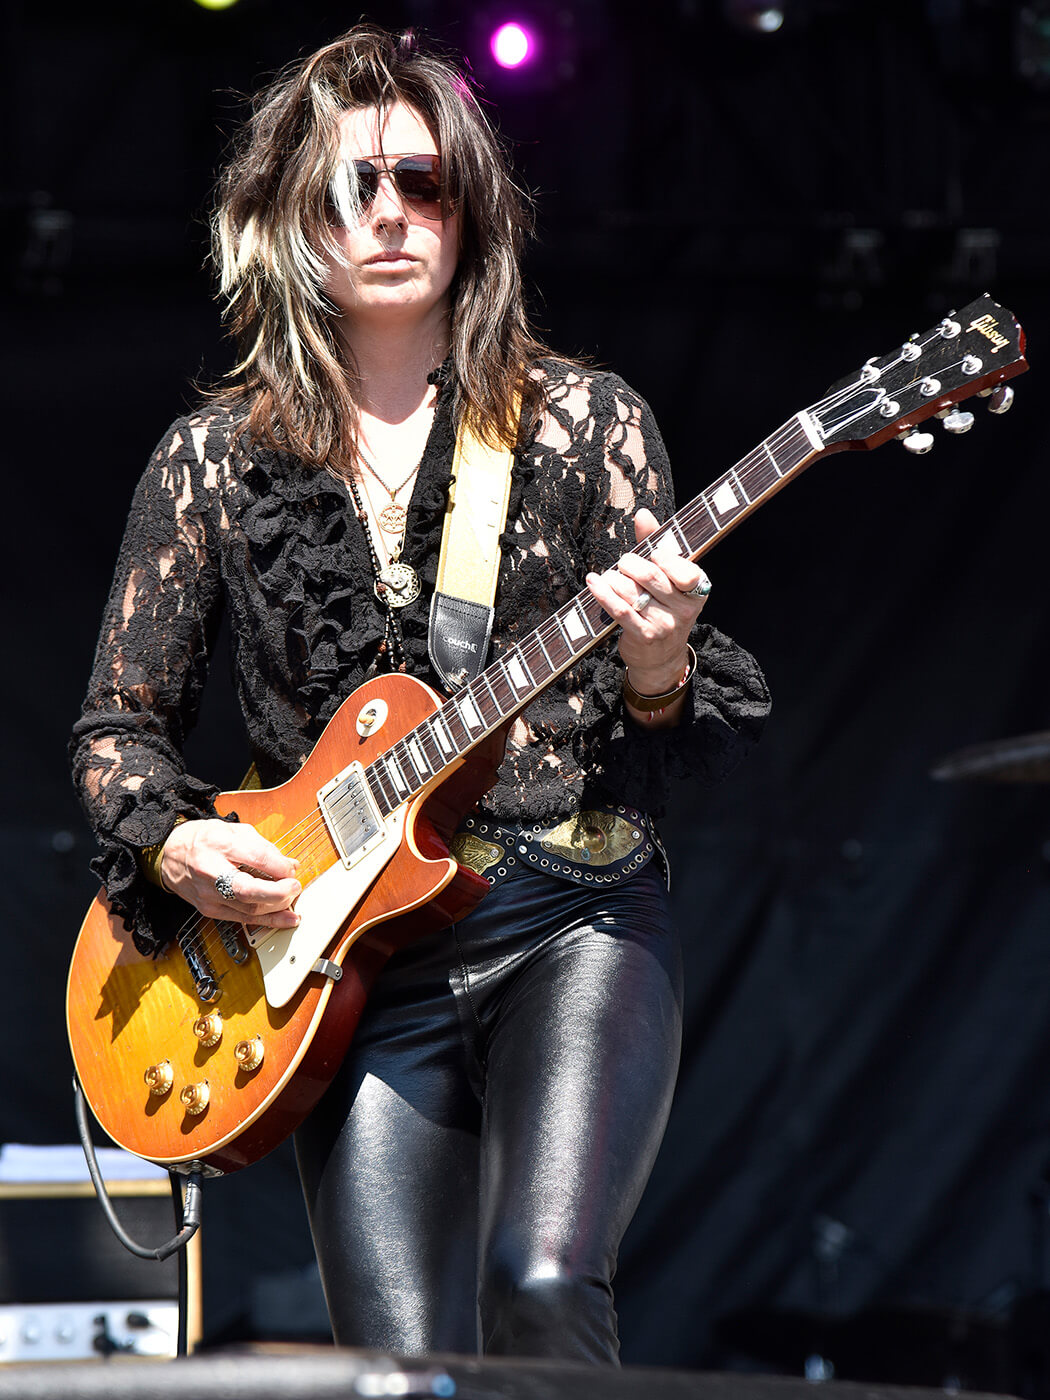 Thunderpussy of Whitney Petty performs during the 2018 Voodoo Music & Arts Experience on October 28, 2018 in New Orleans, Louisiana.